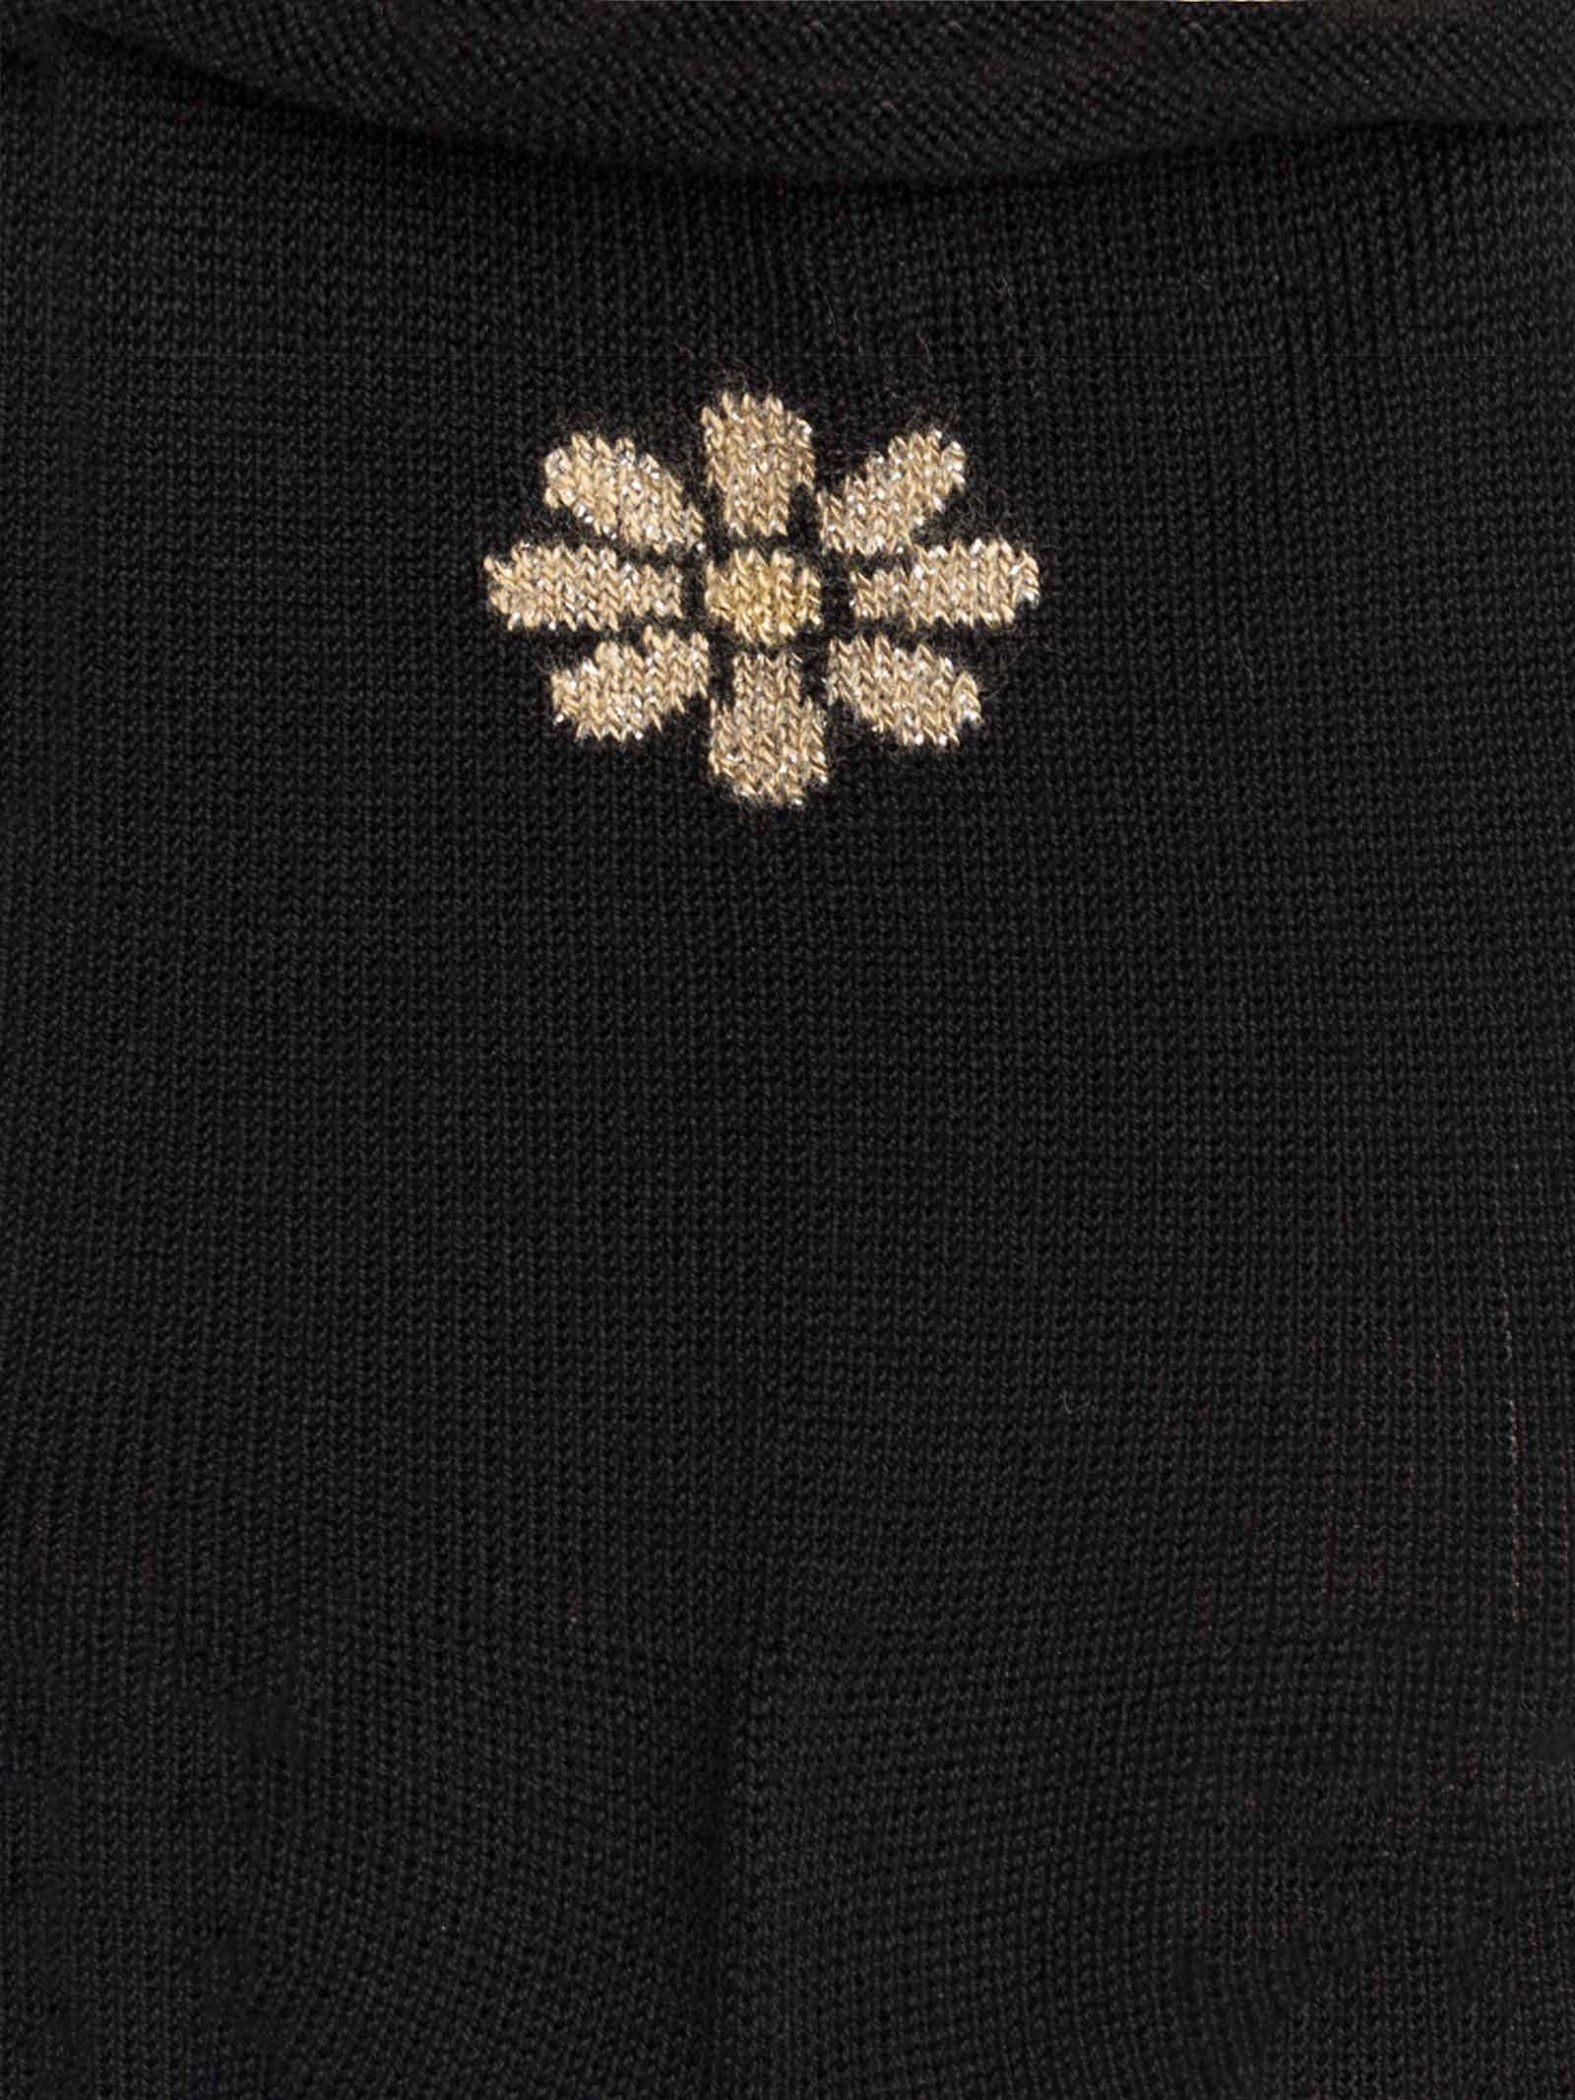 Women's plain calf socks with flower in fresh cotton - Made in Italy